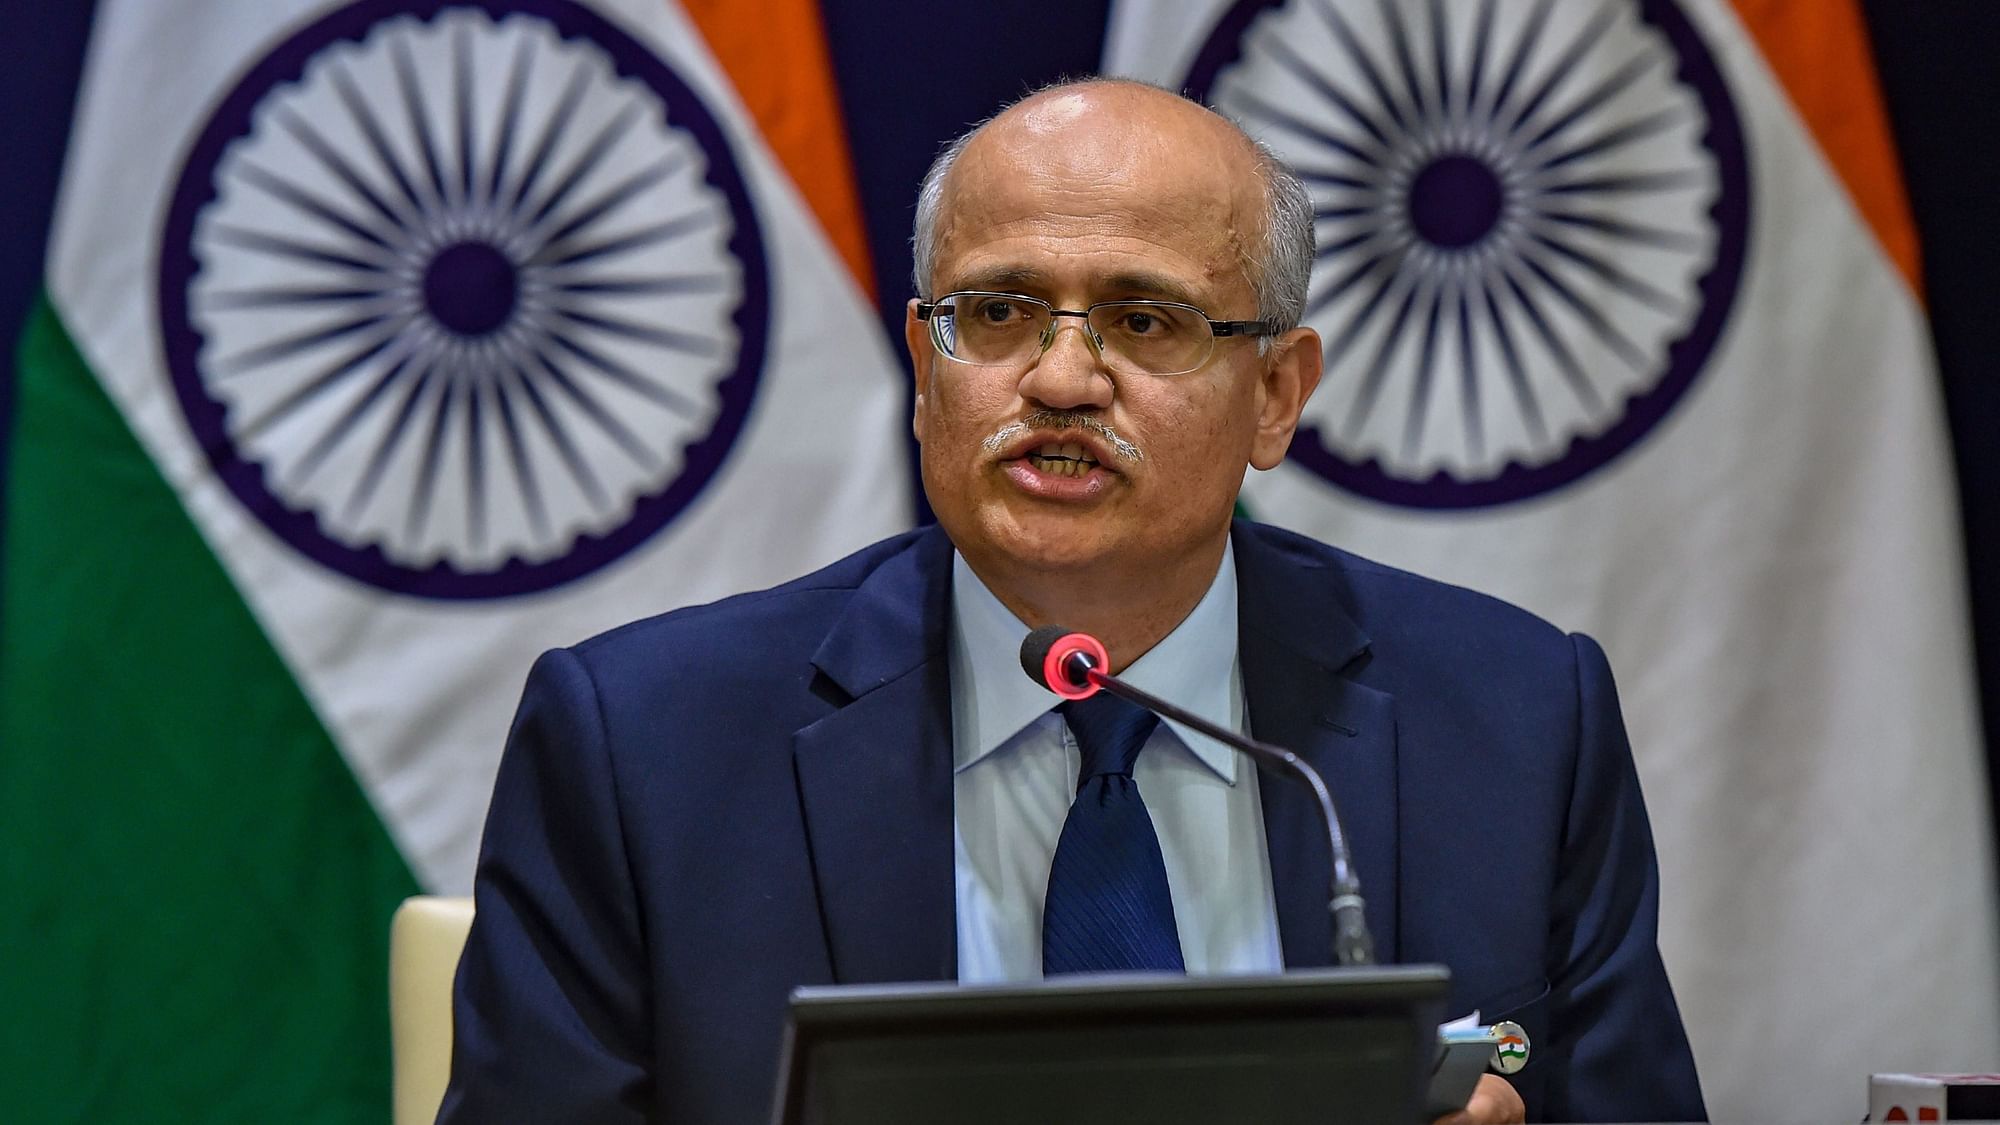 Foreign Secretary Vijay Gokhale briefed media on air strikes India carried out on Tuesday, 26 February.